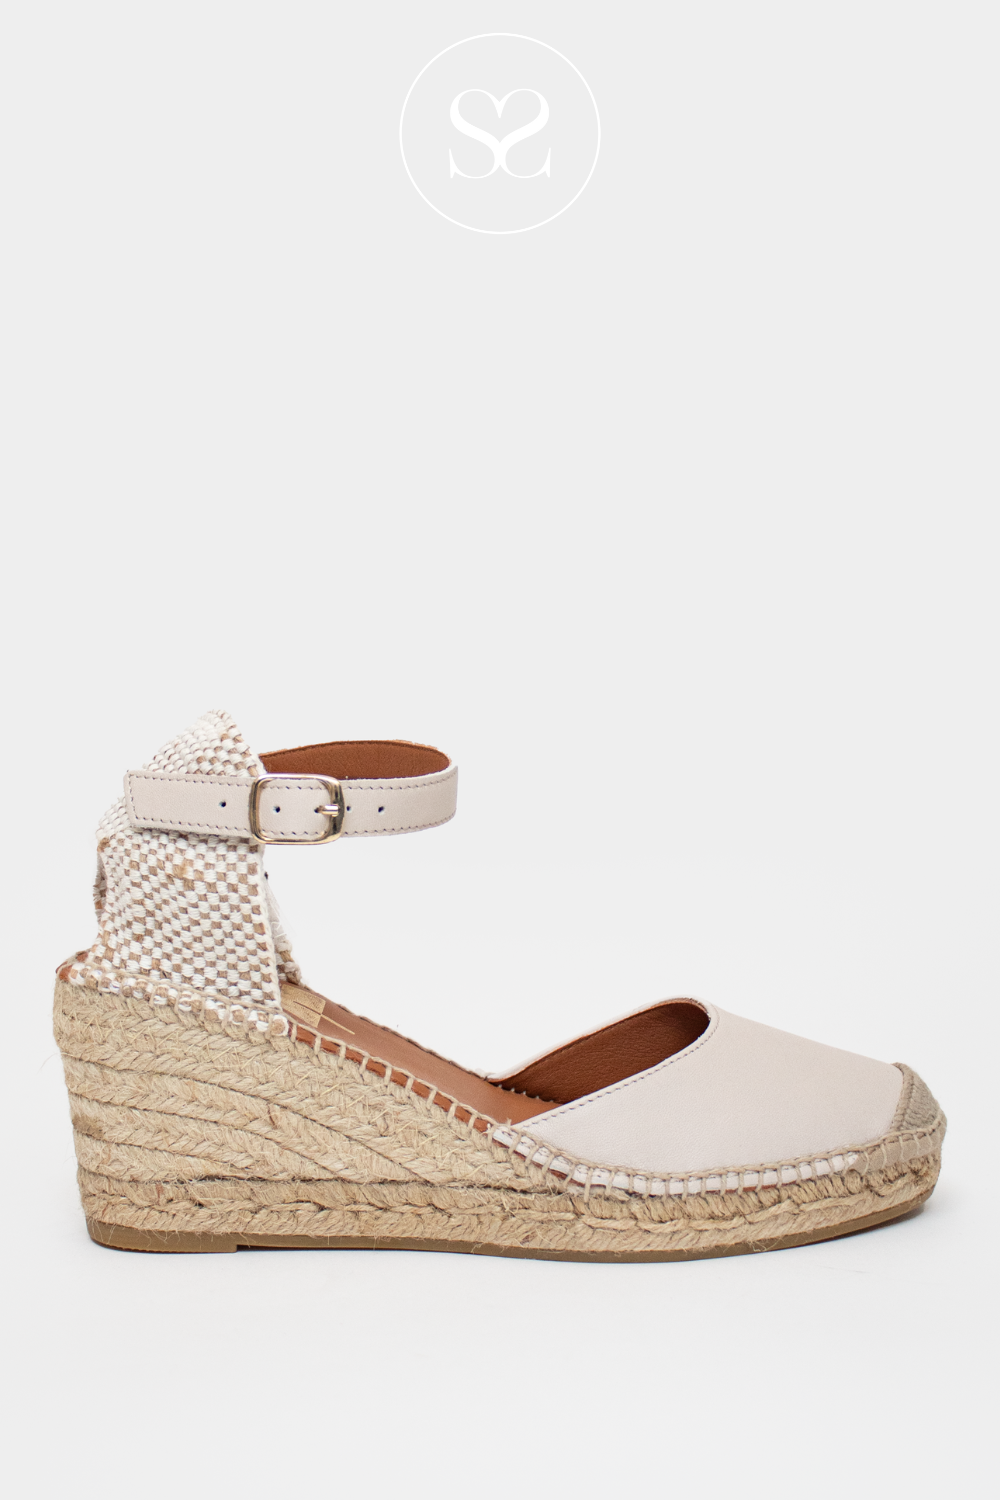 VIGUERA 1743 CREAM LEATHER LOW WEDGE ESPADRILLE WITH BUCKLE STRAP AT FRONT